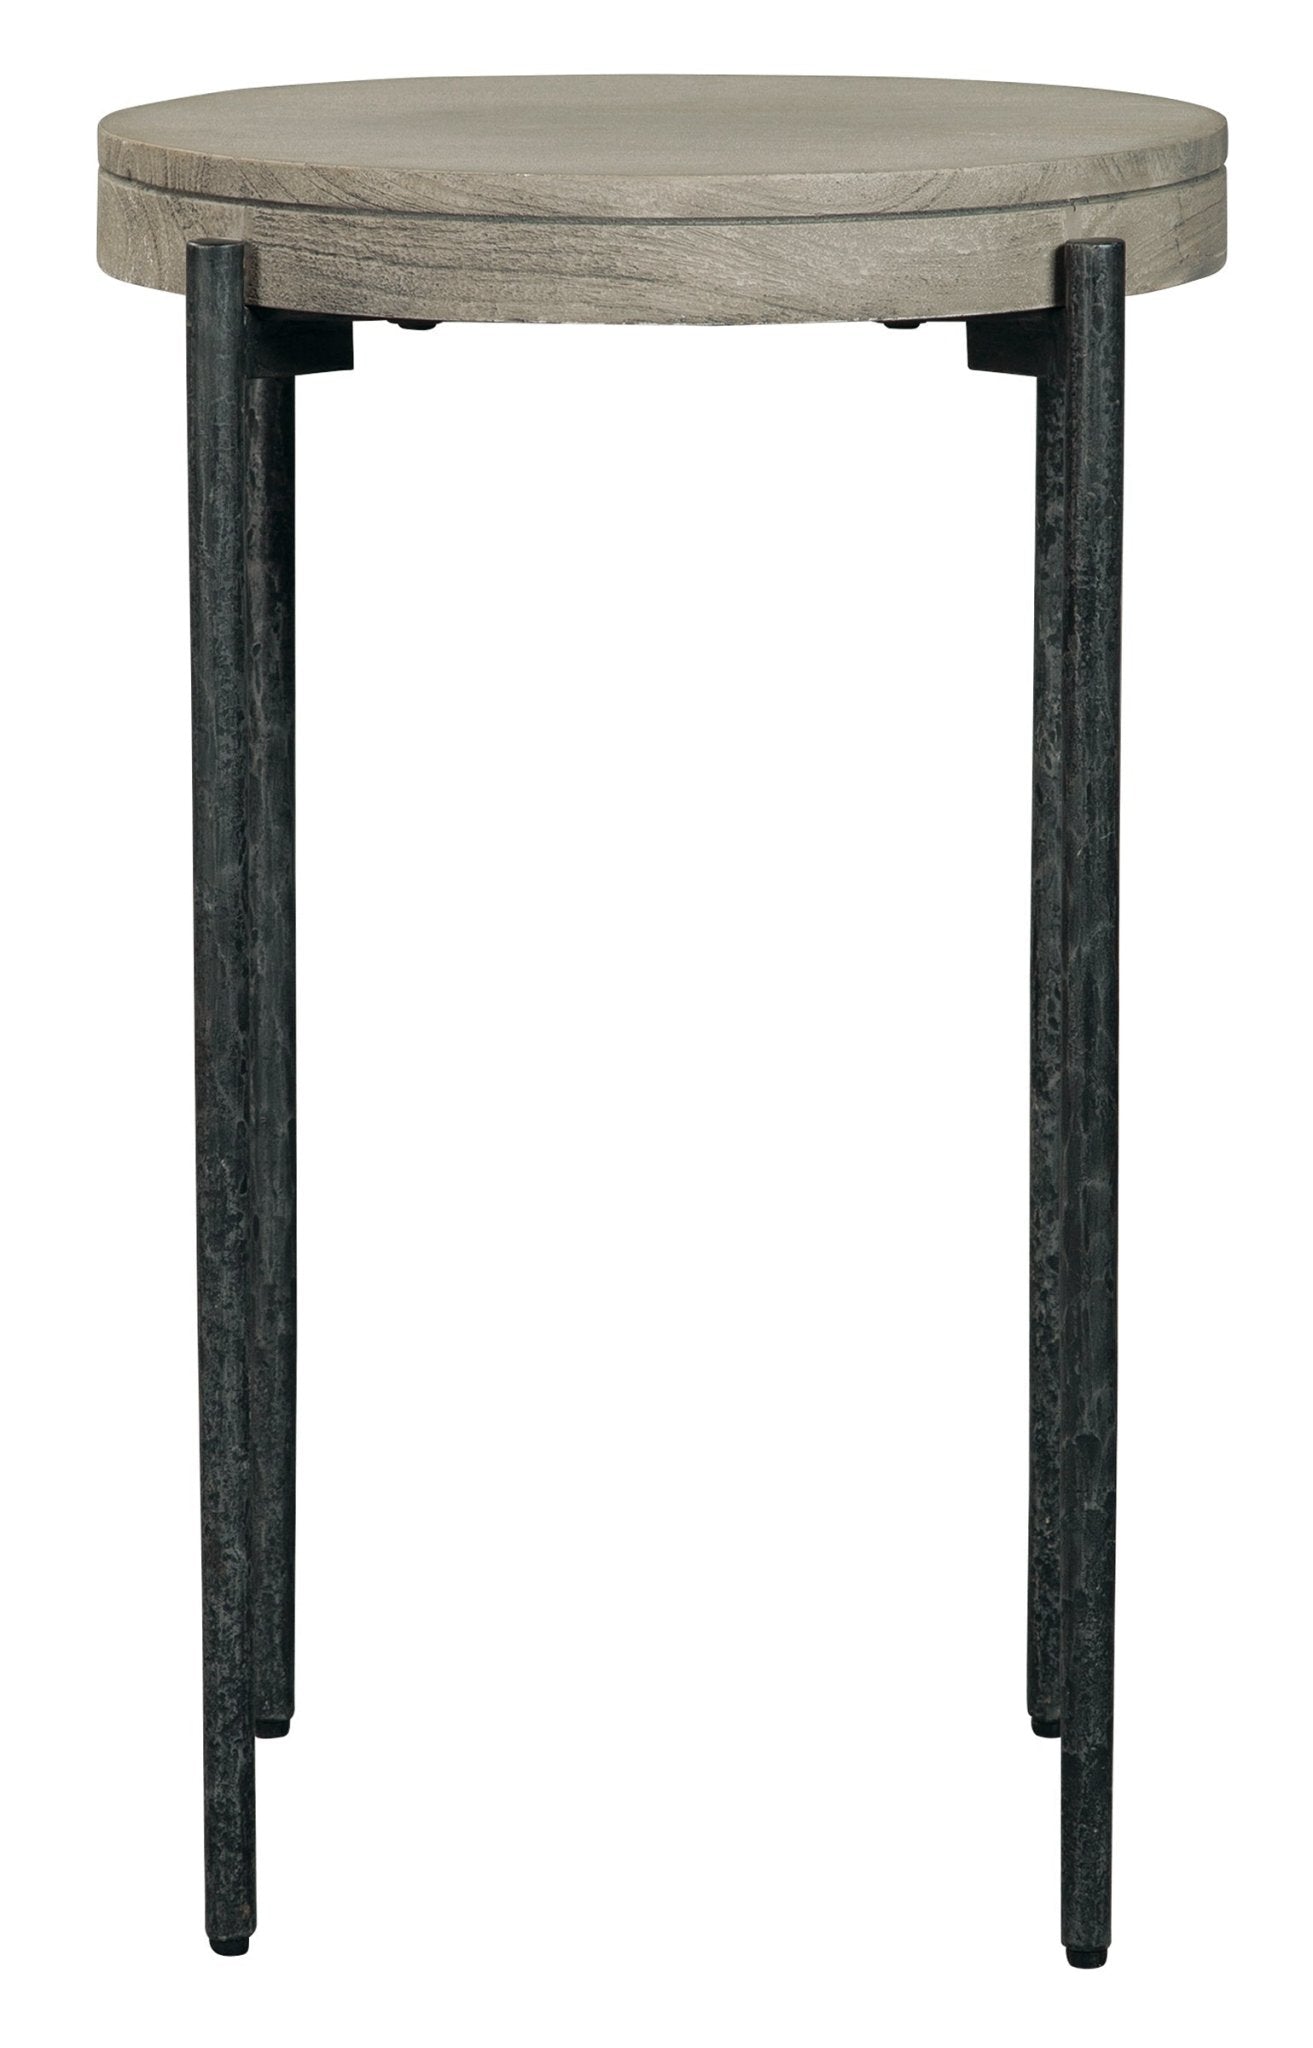 Bedford Park Gray Chair Side Table - Furniture - Tipplergoods